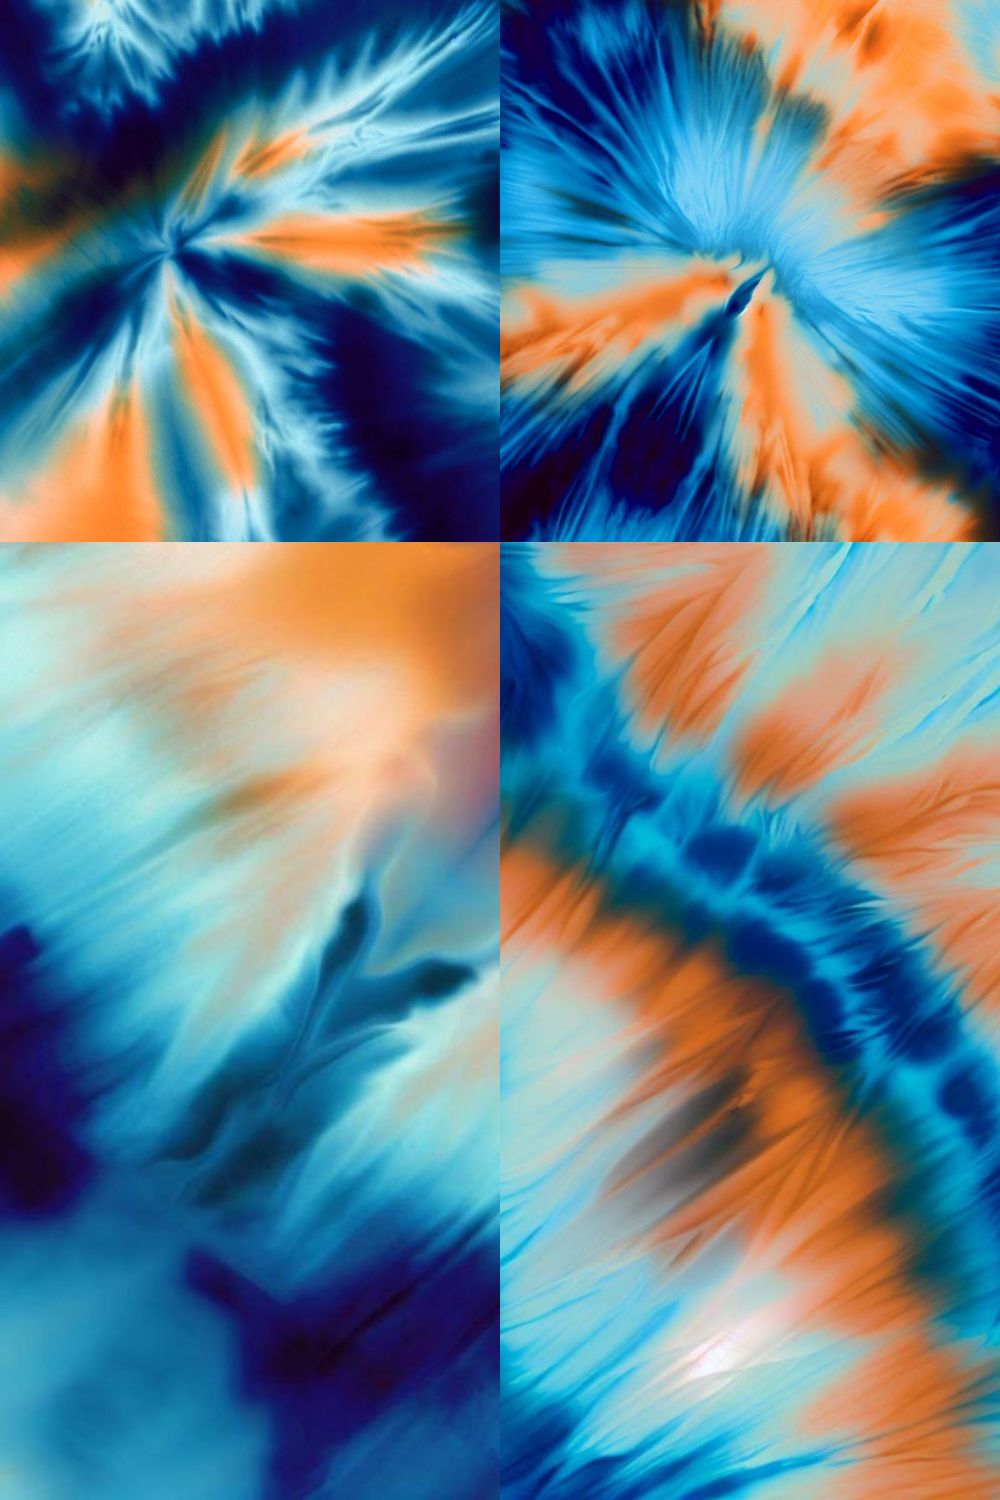 4 Tie dye psychedelic background images in the colour combination orange-blue pinterest preview image.